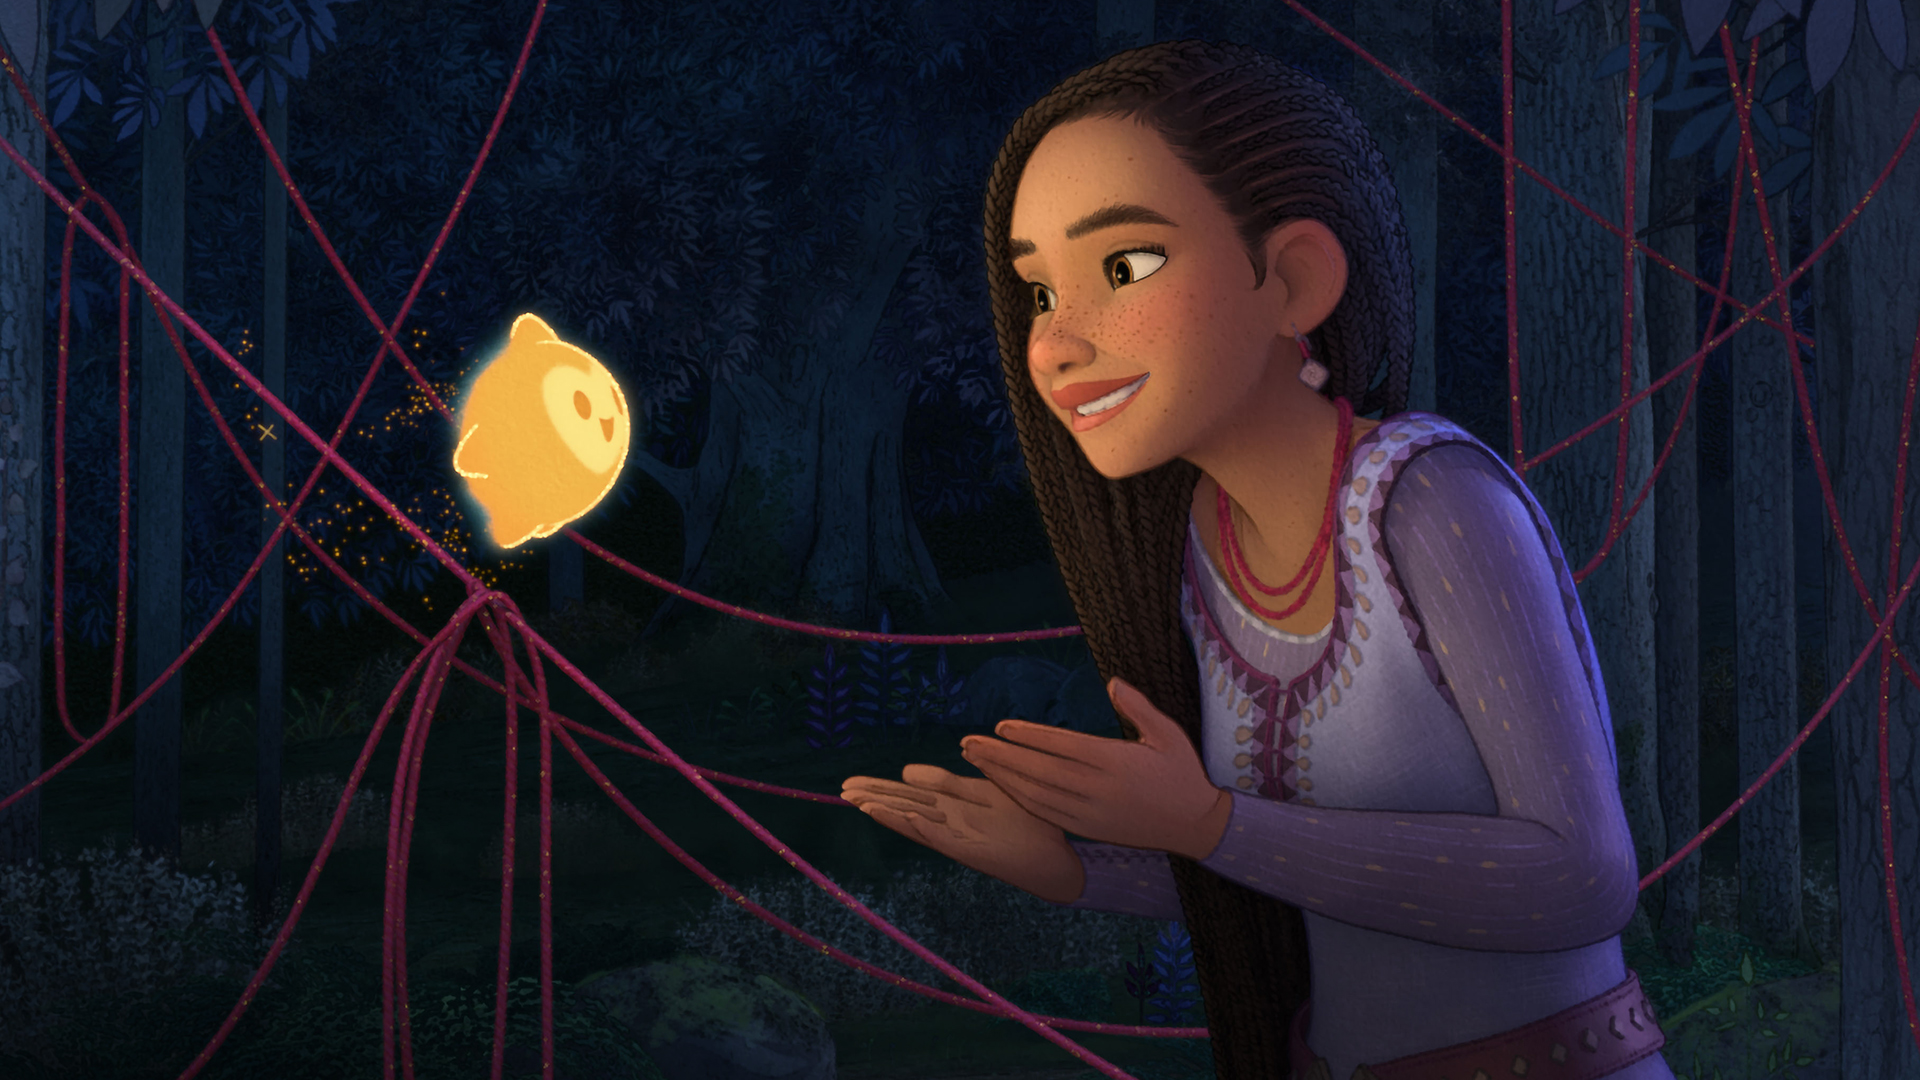 How To Draw The Star Character From Disney's 'Wish' Movie, Interviews